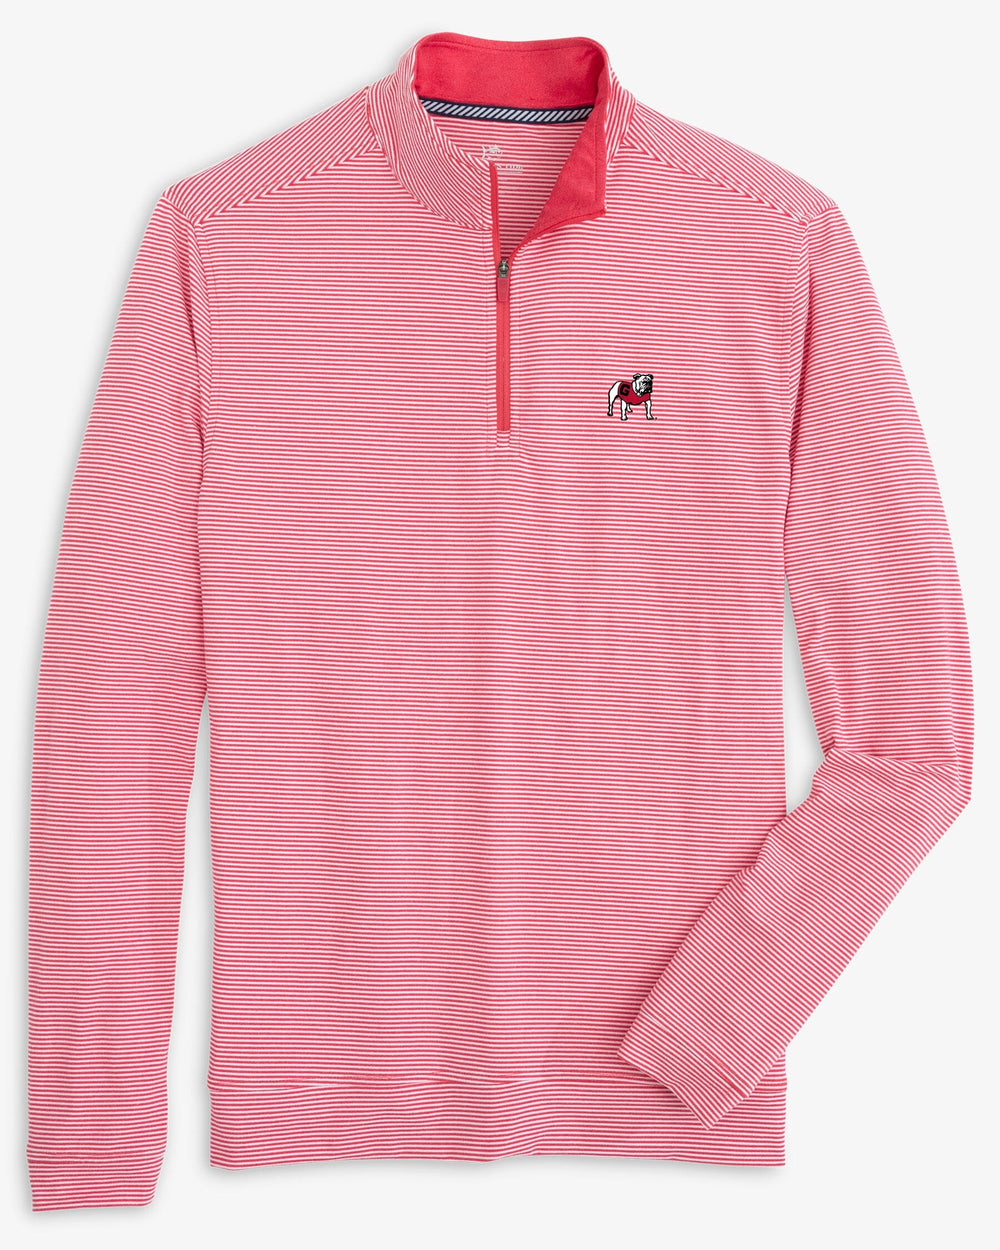 The front view of the Georgia Bulldogs Cruiser Micro-Stripe Heather Quarter Zip by Southern Tide - Heather Varsity Red